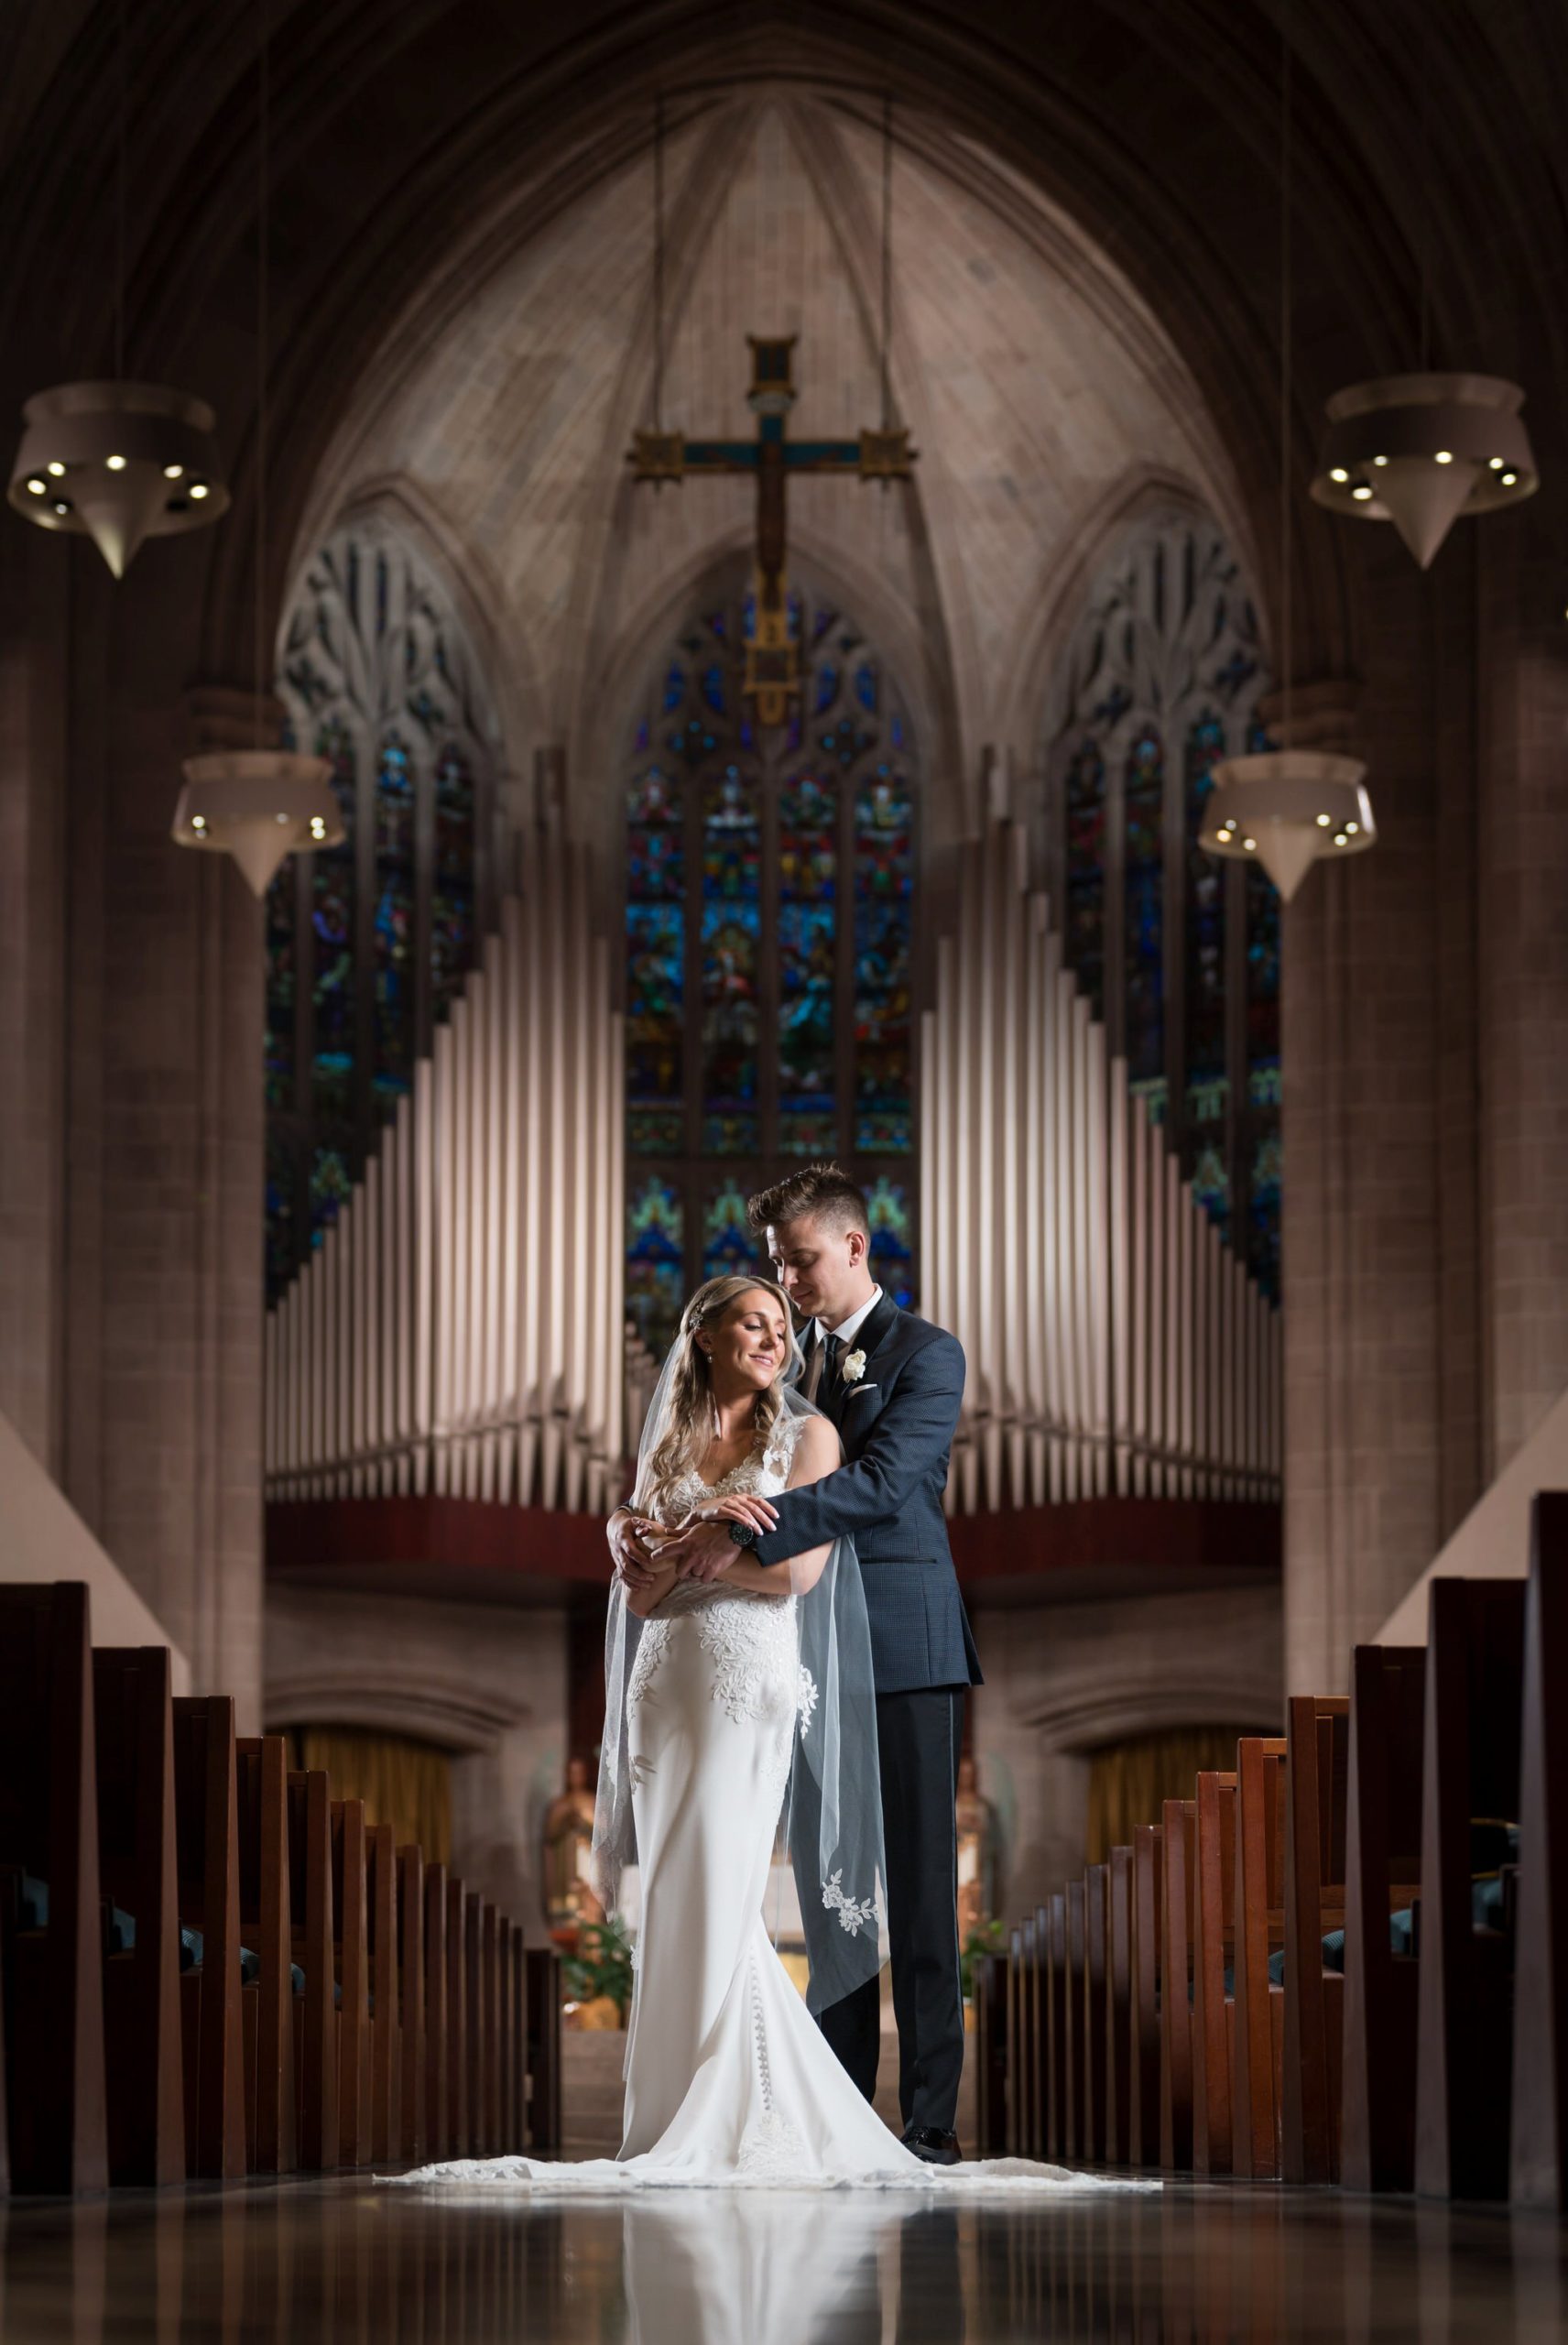 A bride and groom pose in the aisle of the Cathedral of the Most Blessed Sacrament.  